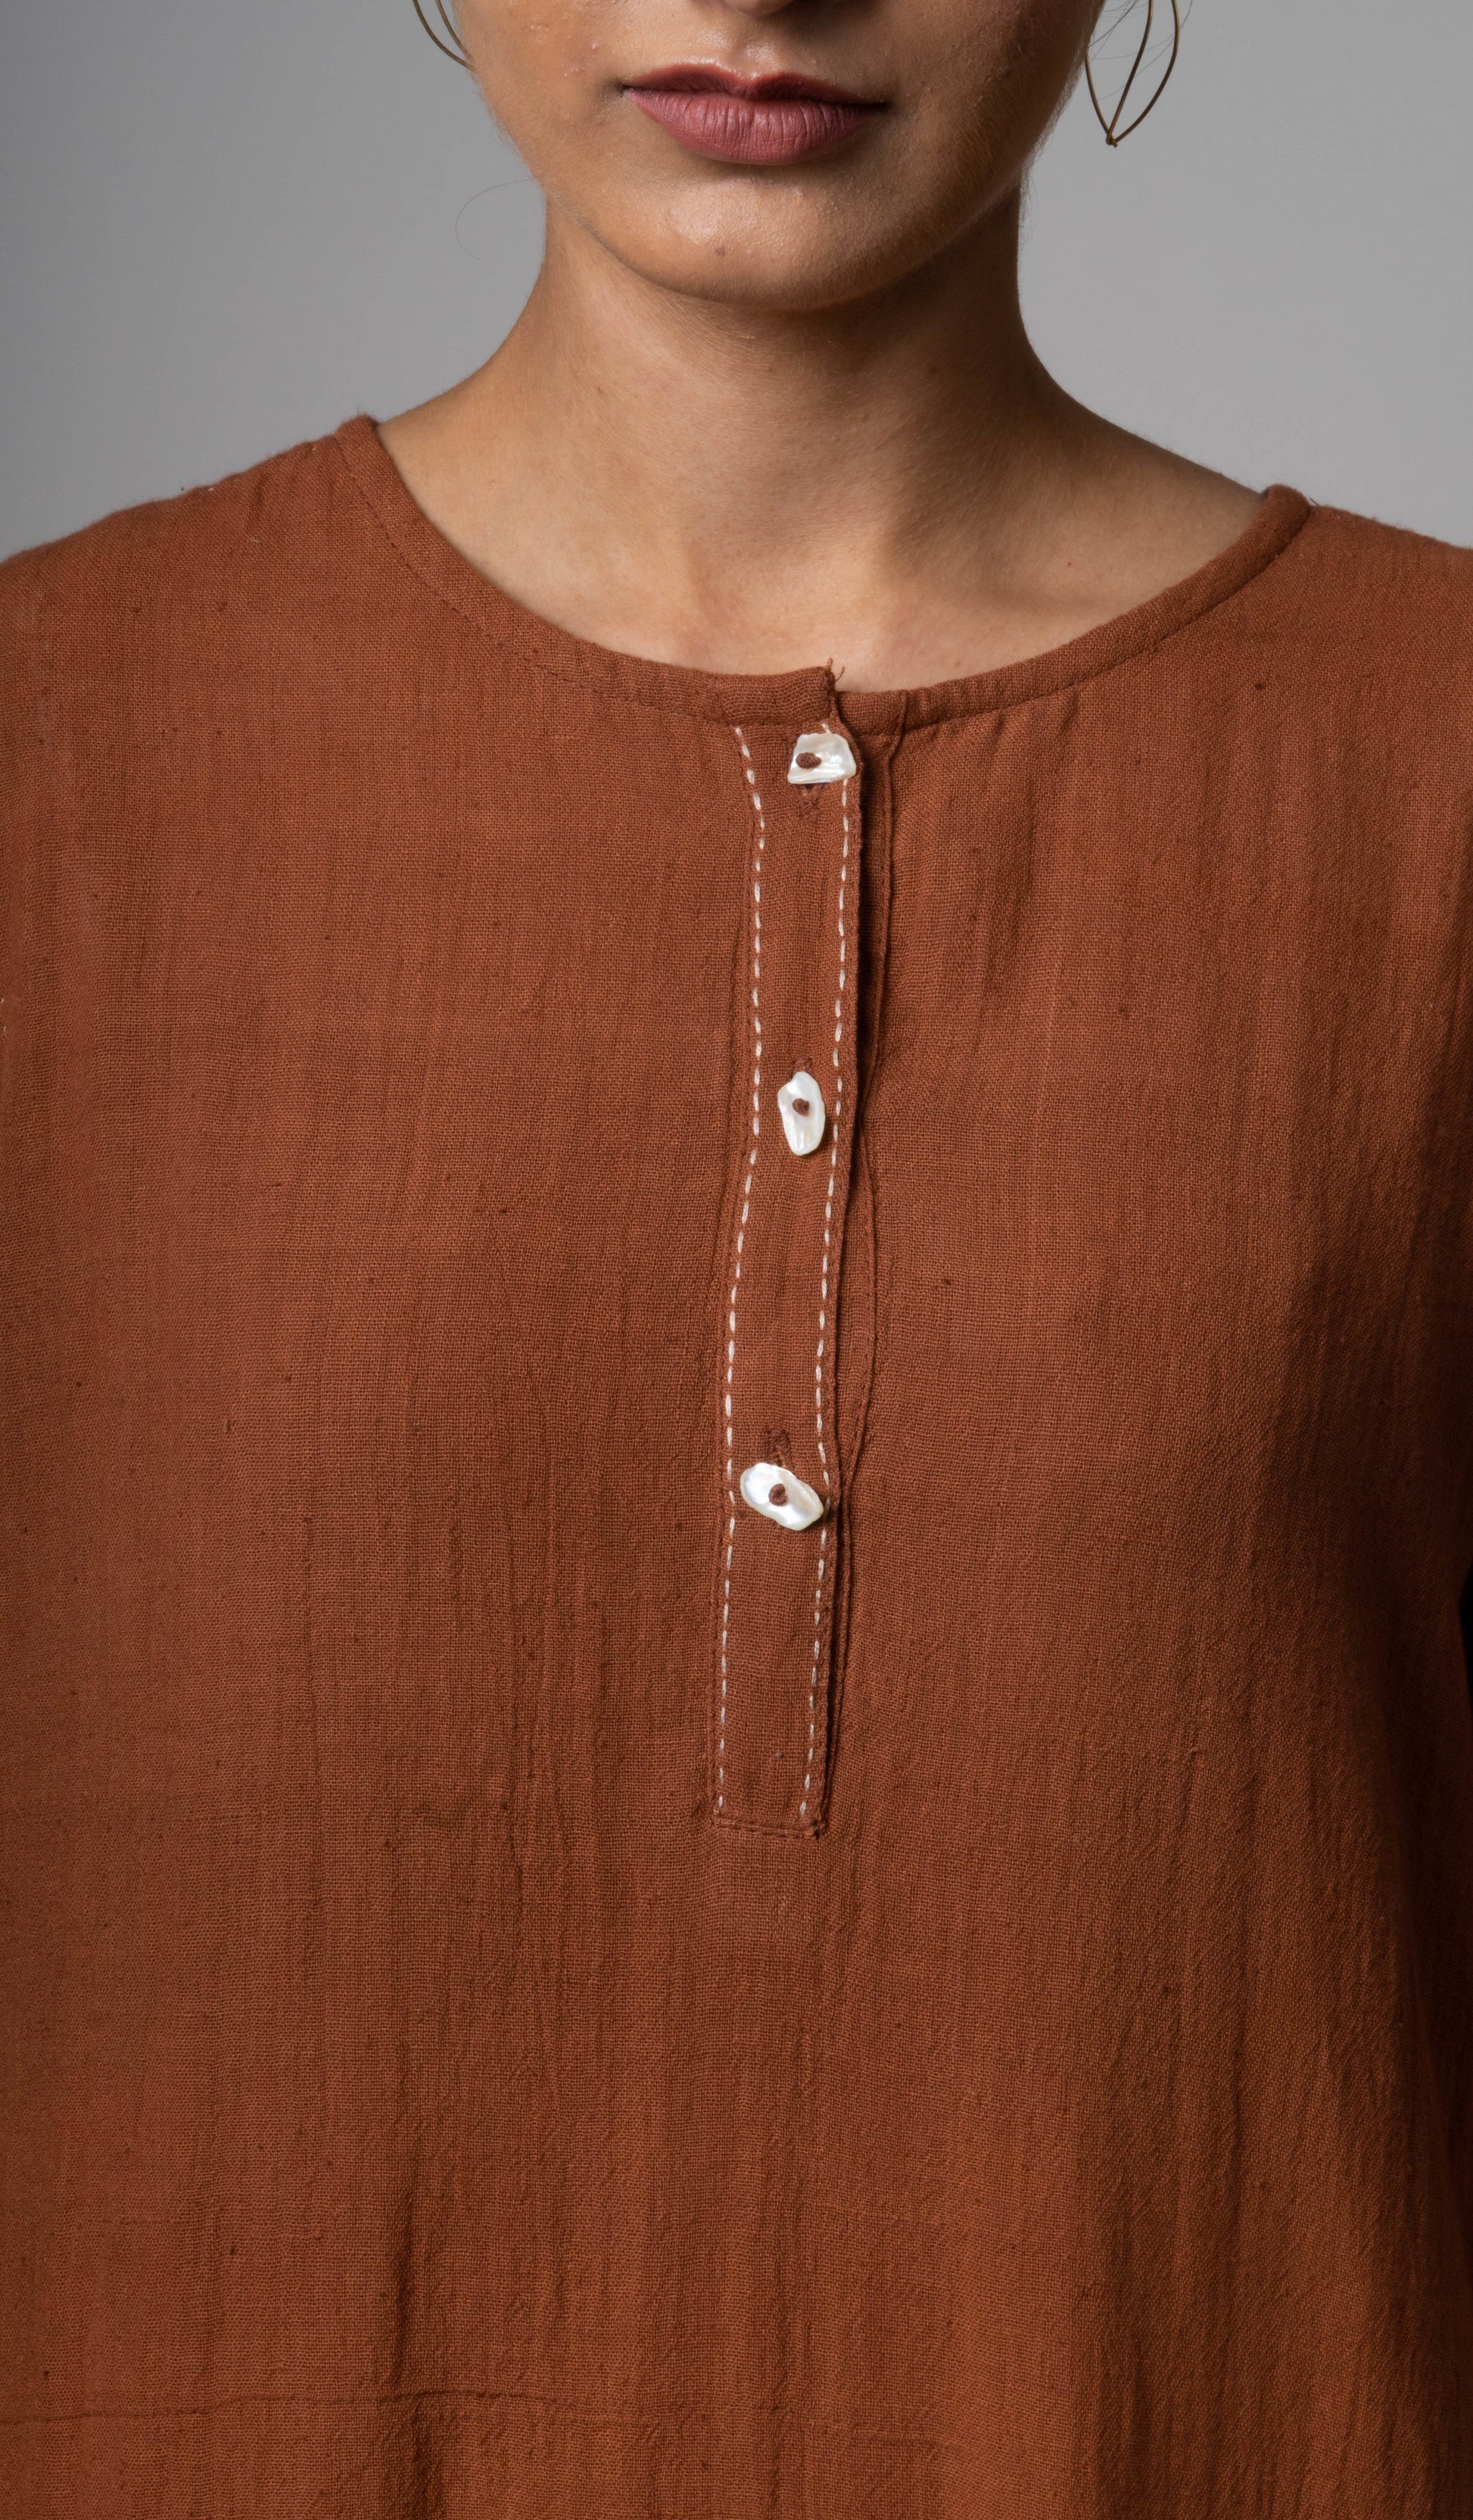 Brown Embroidered Cotton Kurta by Lafaani with Brown, Casual Wear, Cotton, fall, Indian Wear, Kurtas, Natural, Regular Fit, Solids, The Way You Look by Lafaani, Womenswear at Kamakhyaa for sustainable fashion